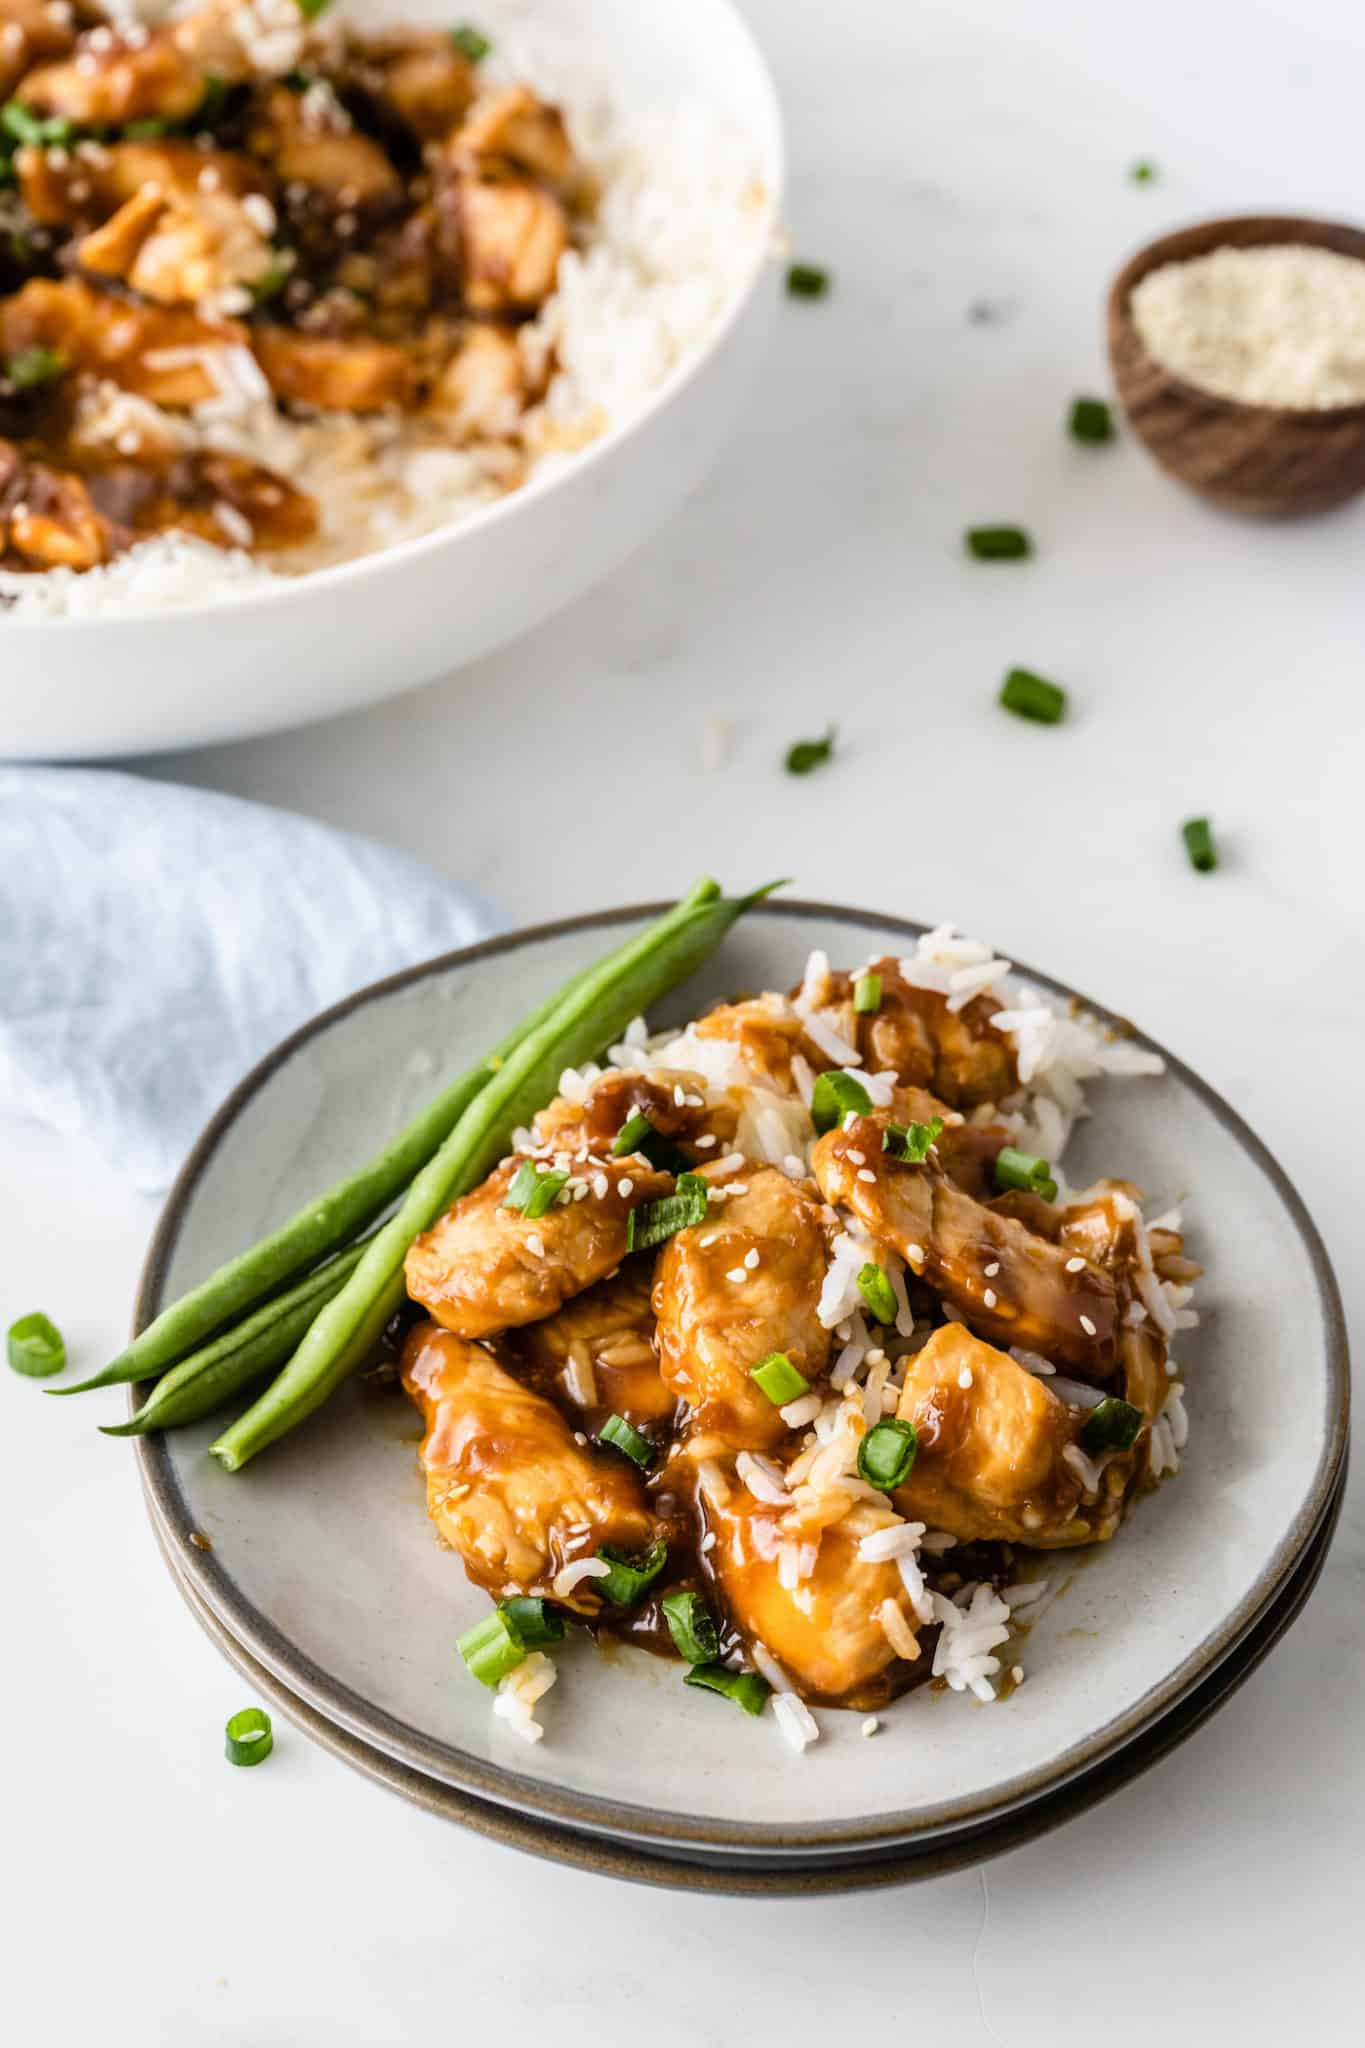 Gluten-free teriyaki chicken with rice served with green beans